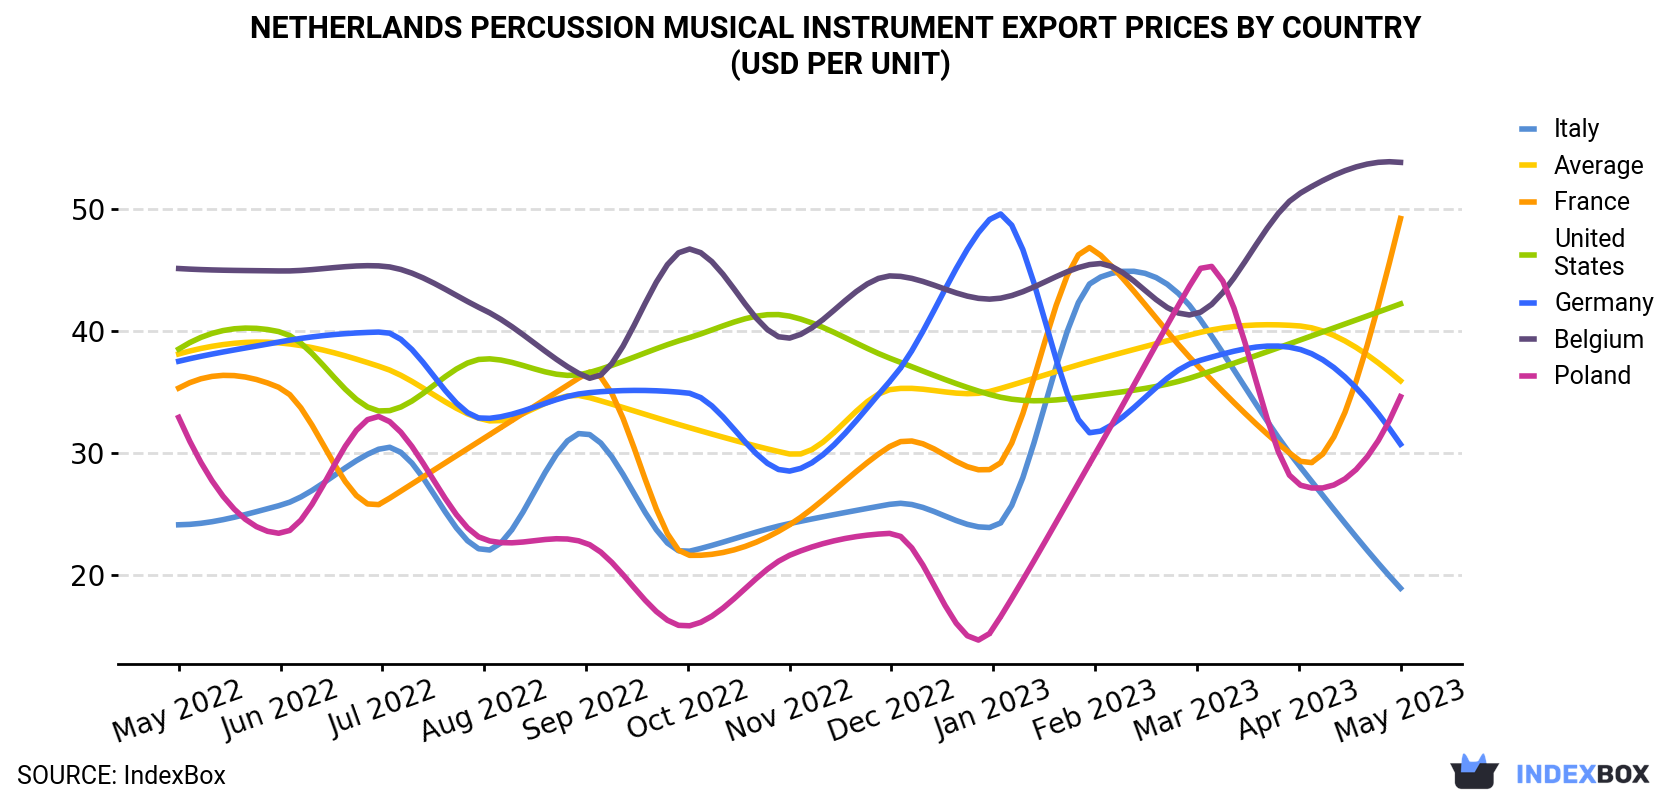 Netherlands Percussion Musical Instrument Export Prices By Country (USD Per Unit)